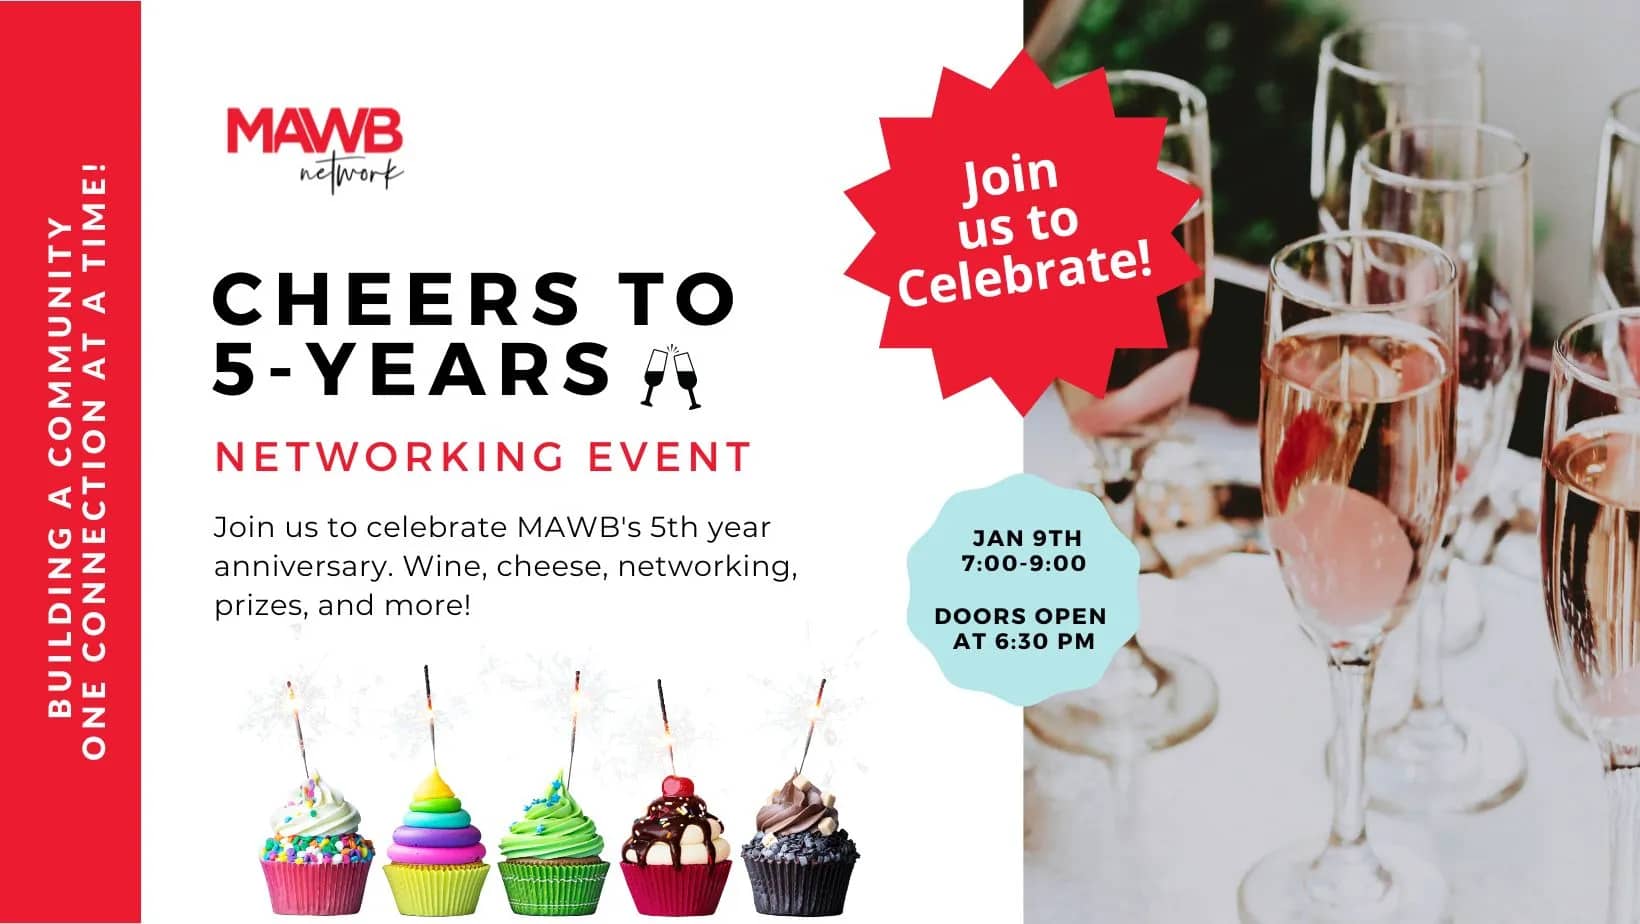 Cheers to 5-Years! Networking Event